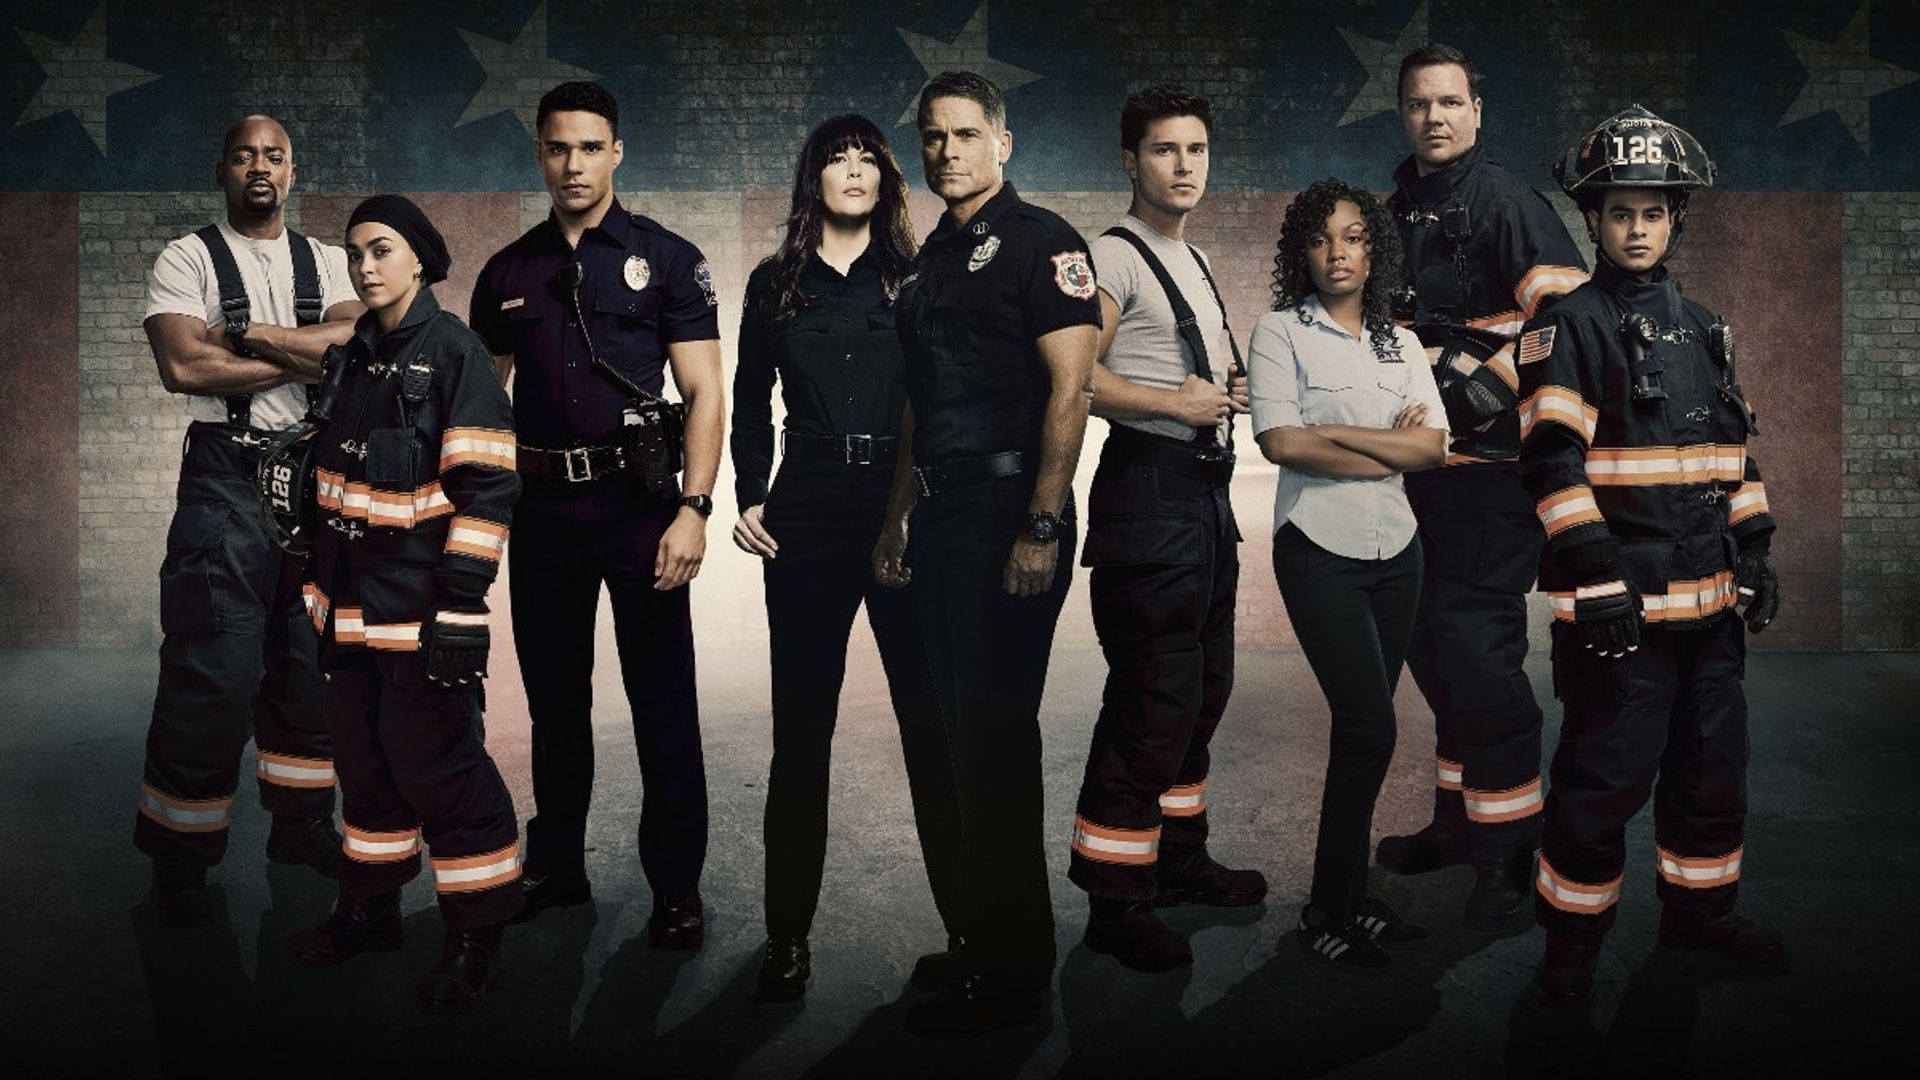 9-1-1: Lone Star has been renewed for season four - details